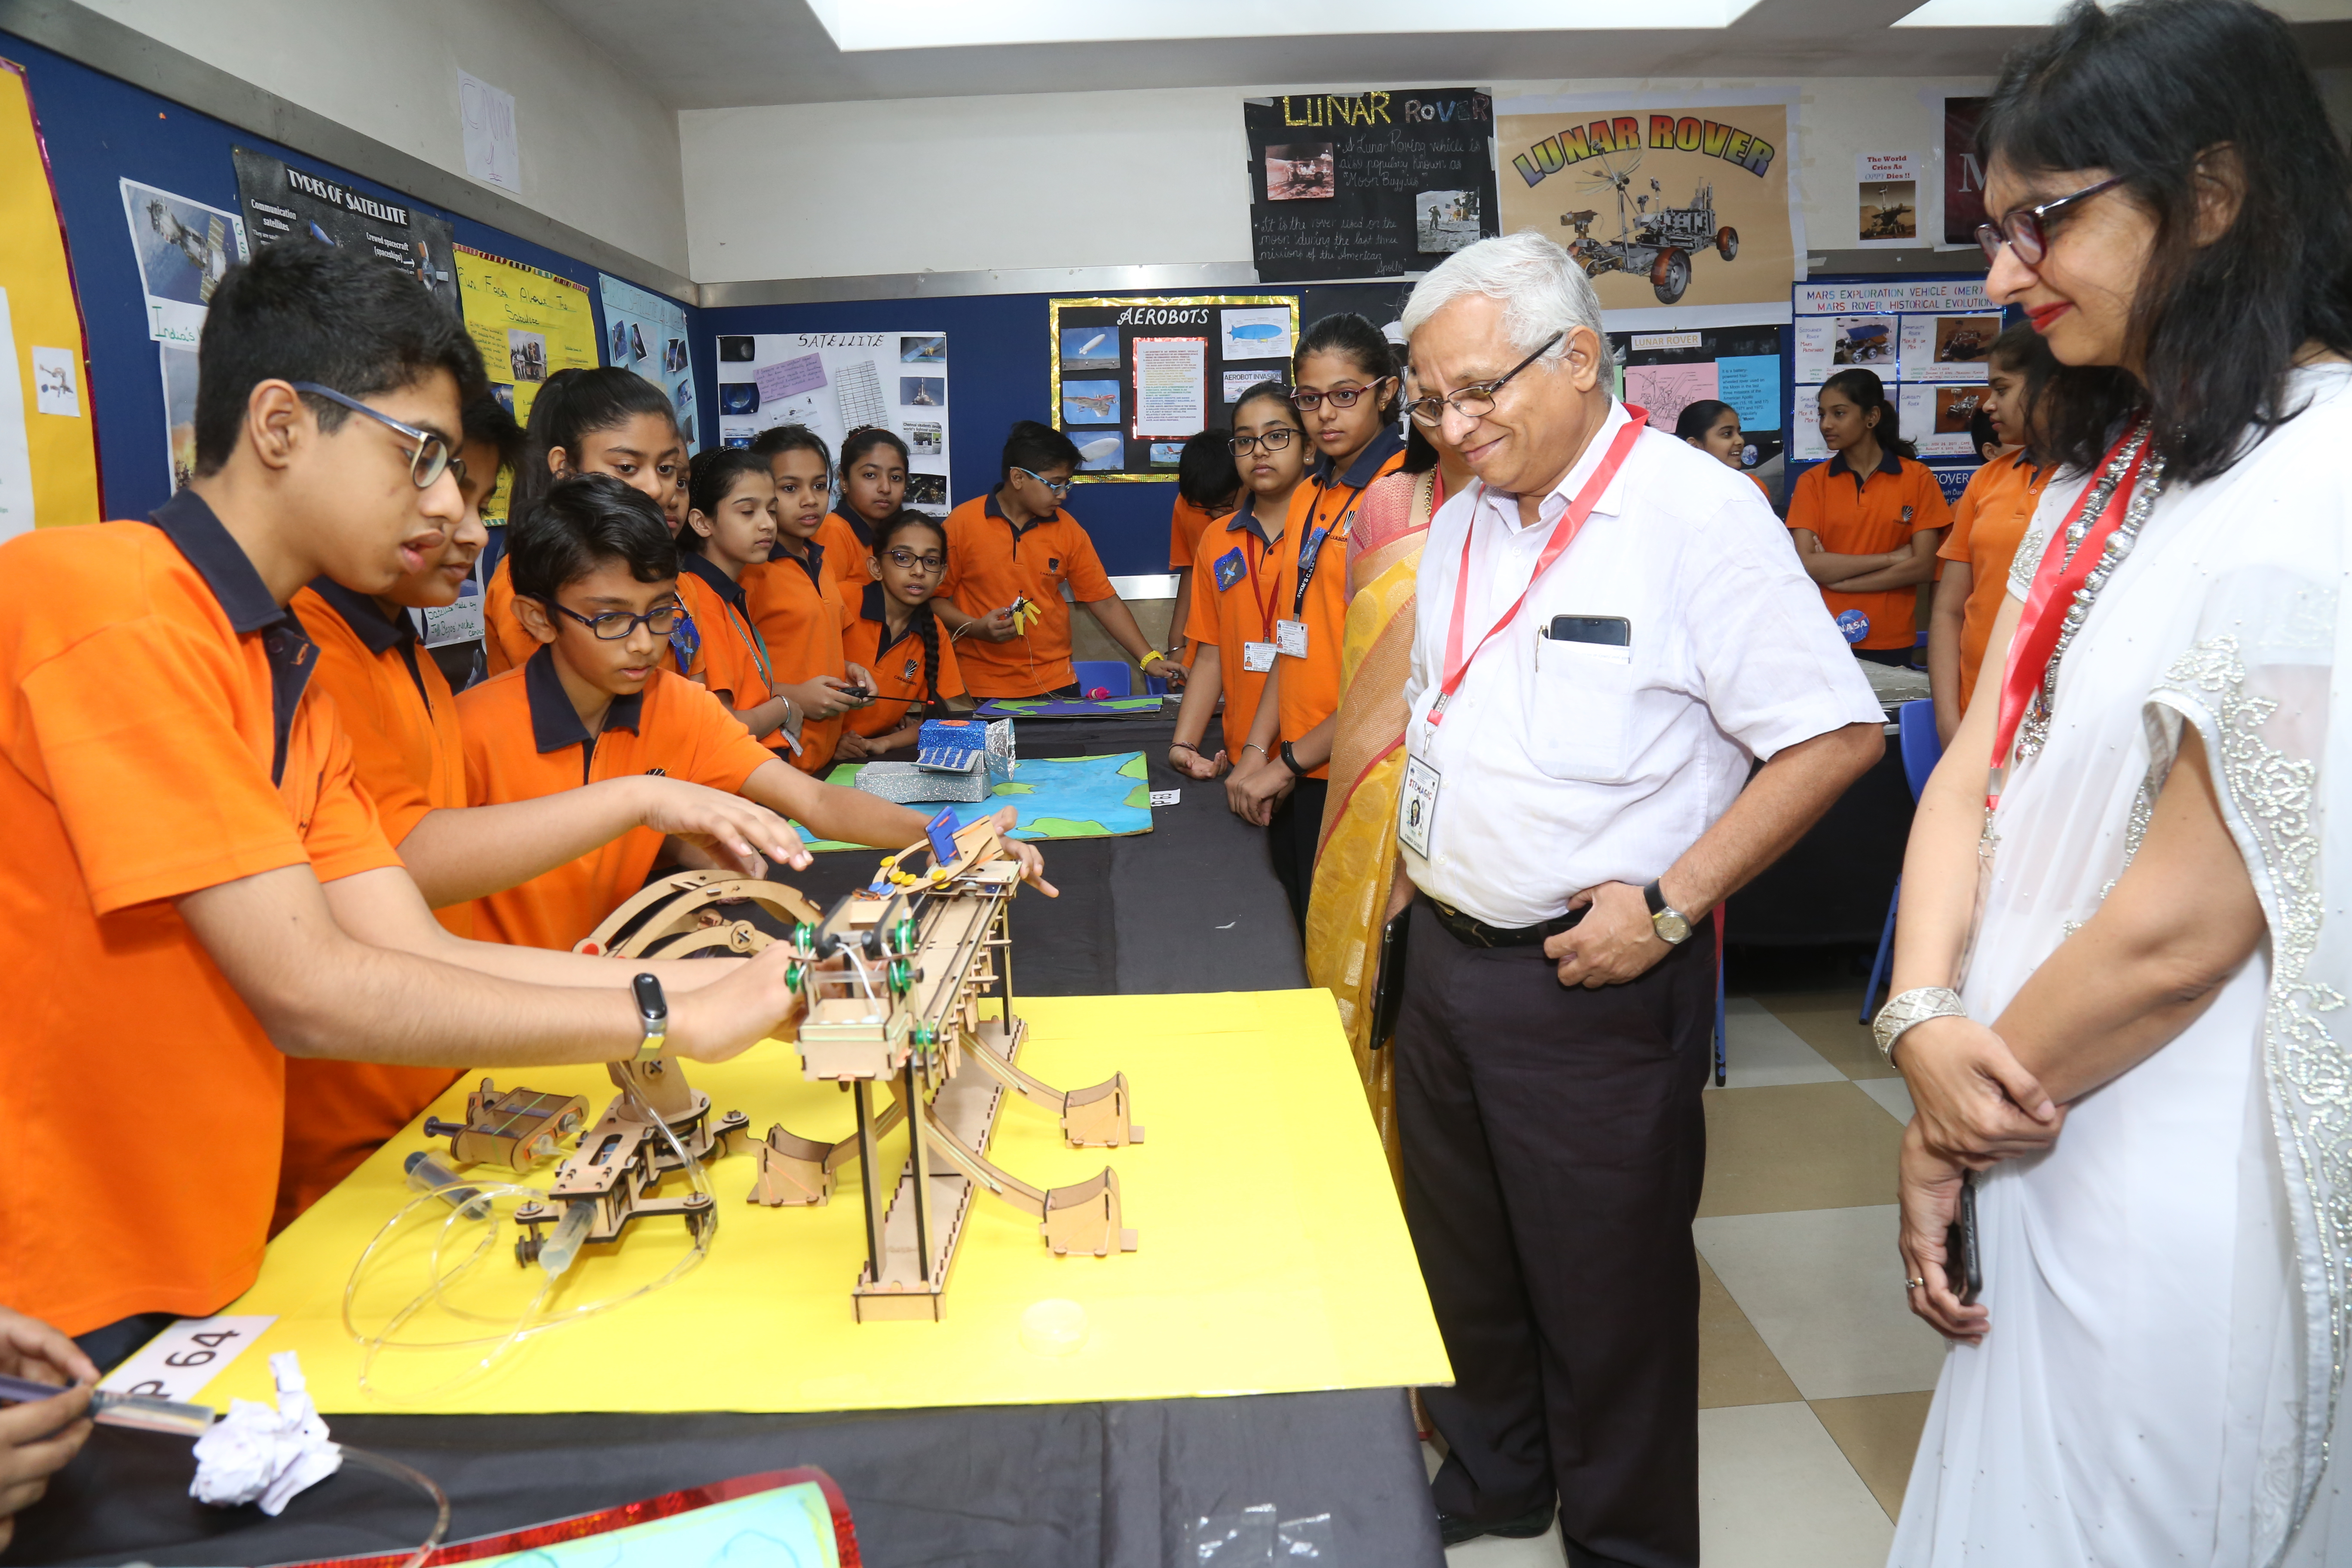 Learning from Project Work on National Science Day in India